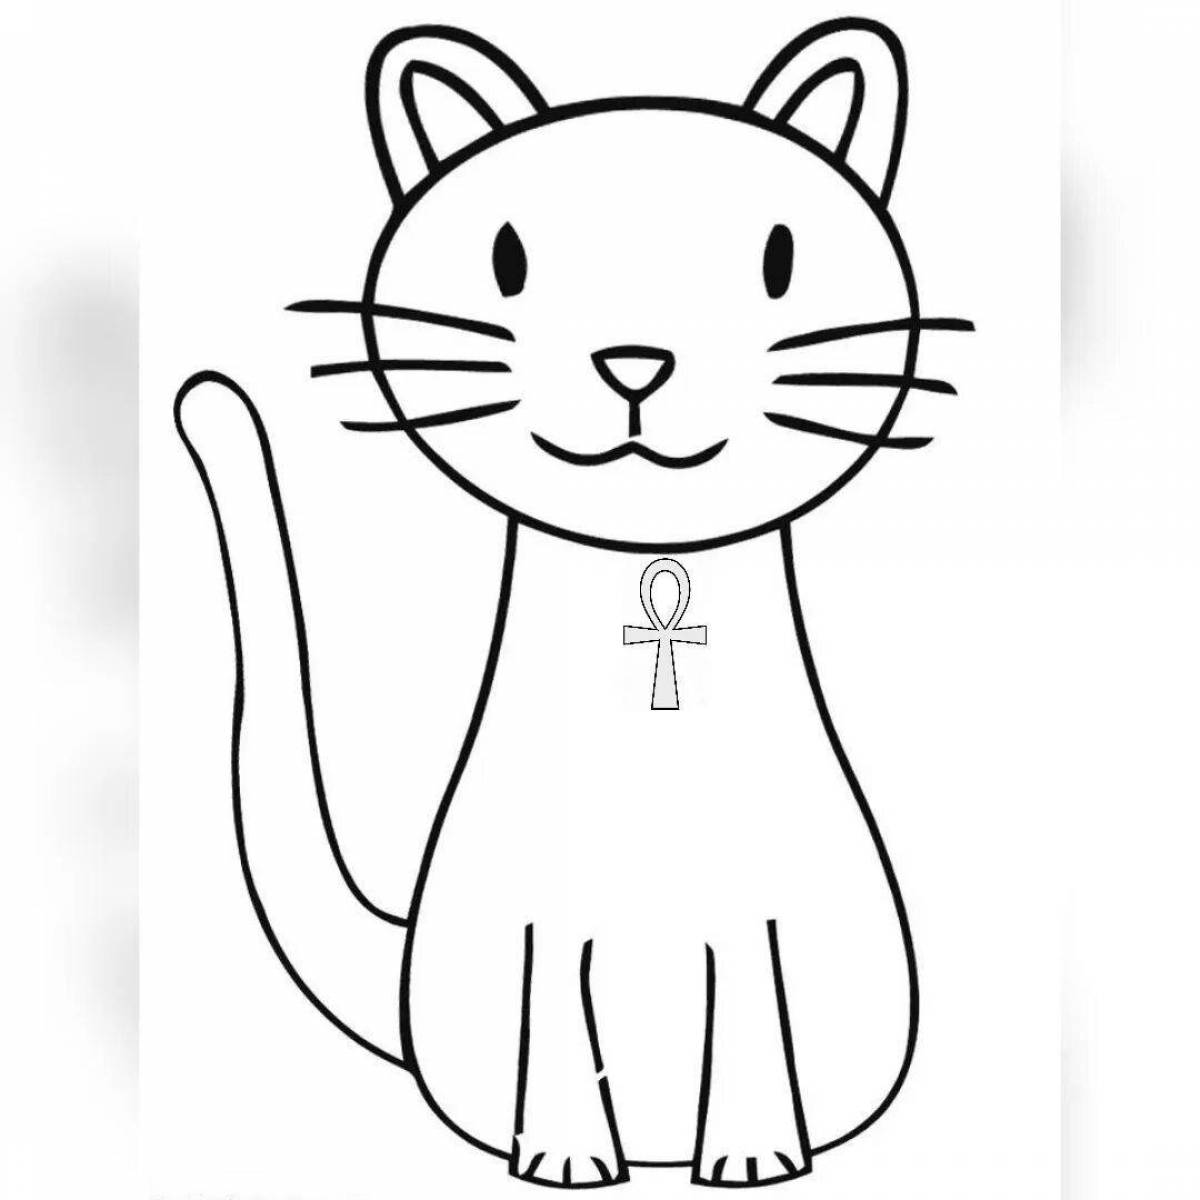 Glowing kitten coloring page